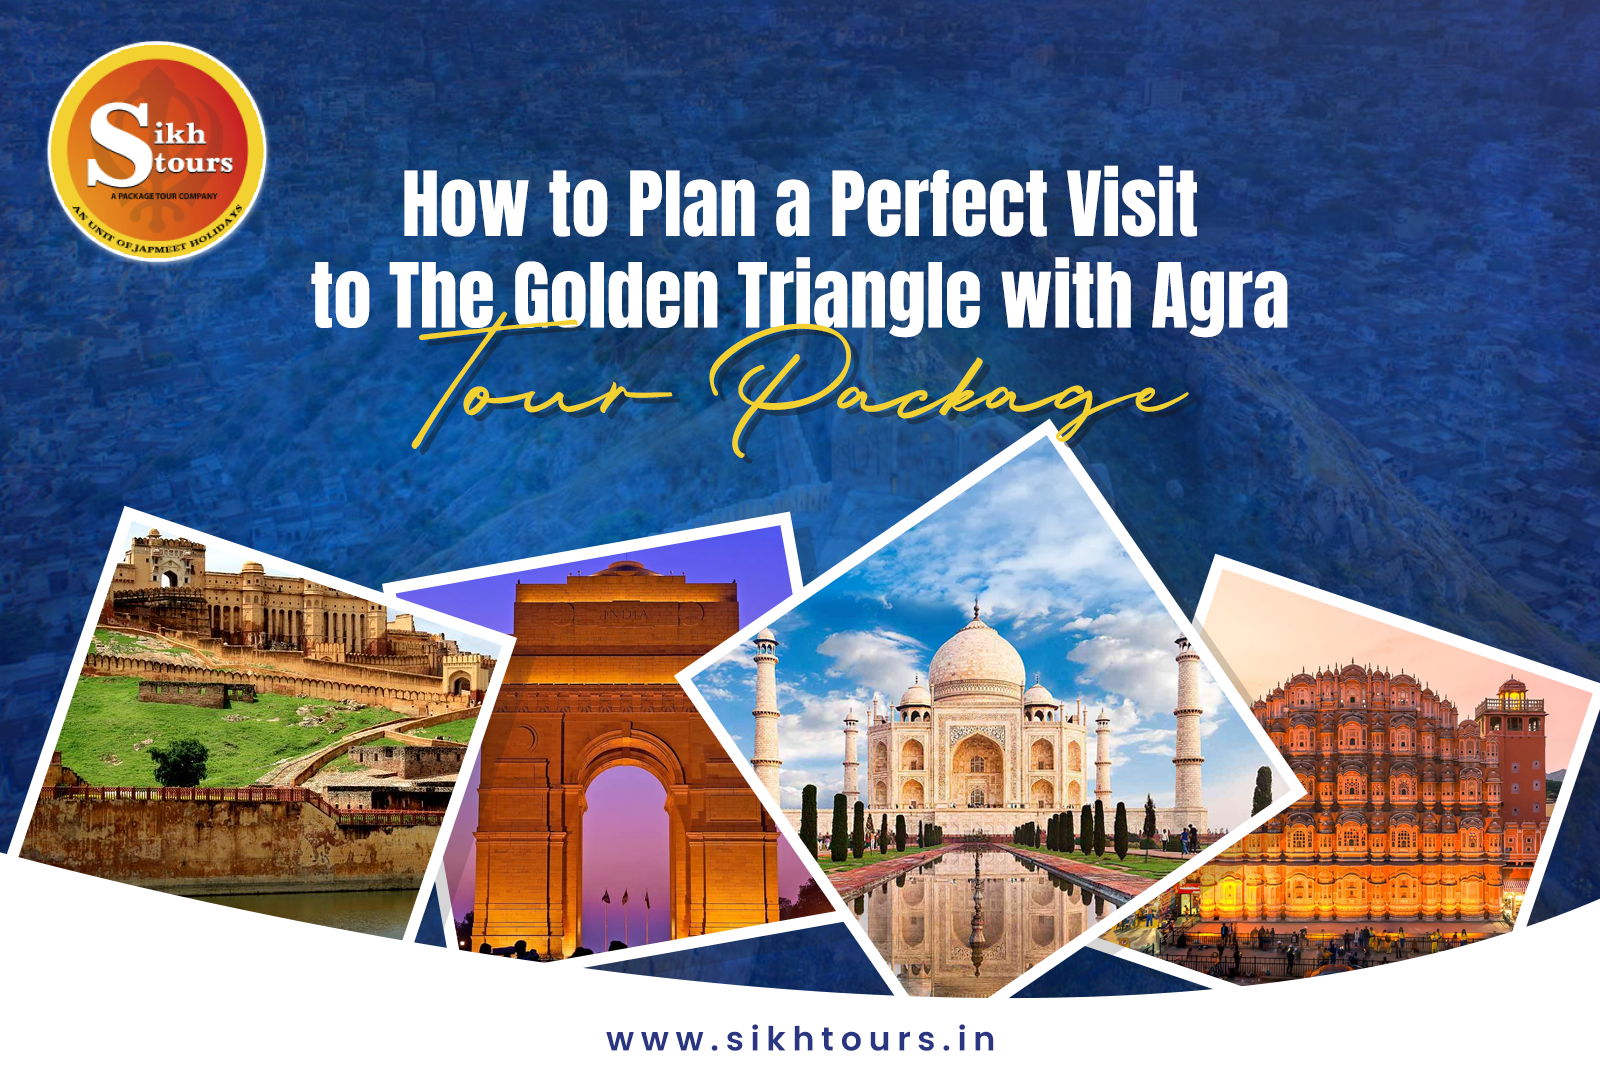 How to Plan a Perfect Visit to the Golden Triangle with Agra Tour Package?